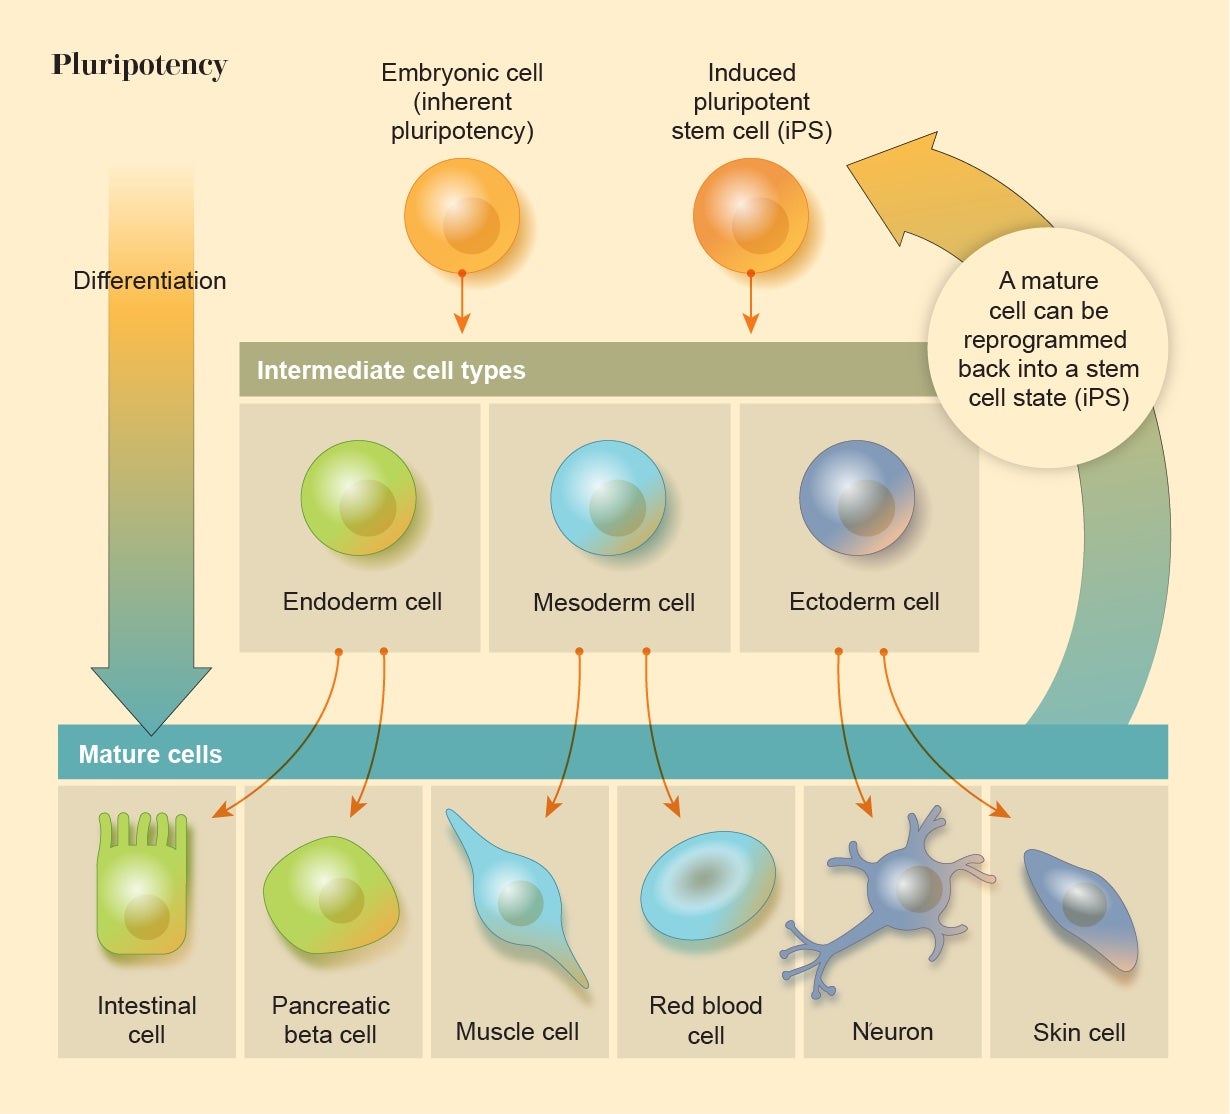 Graphic shows how pluripotency works. Embryonic cells differentiate into one of three intermediate cell types, then into a variety of mature cells. A mature cell can then be reprogrammed back into a stem cell state. 